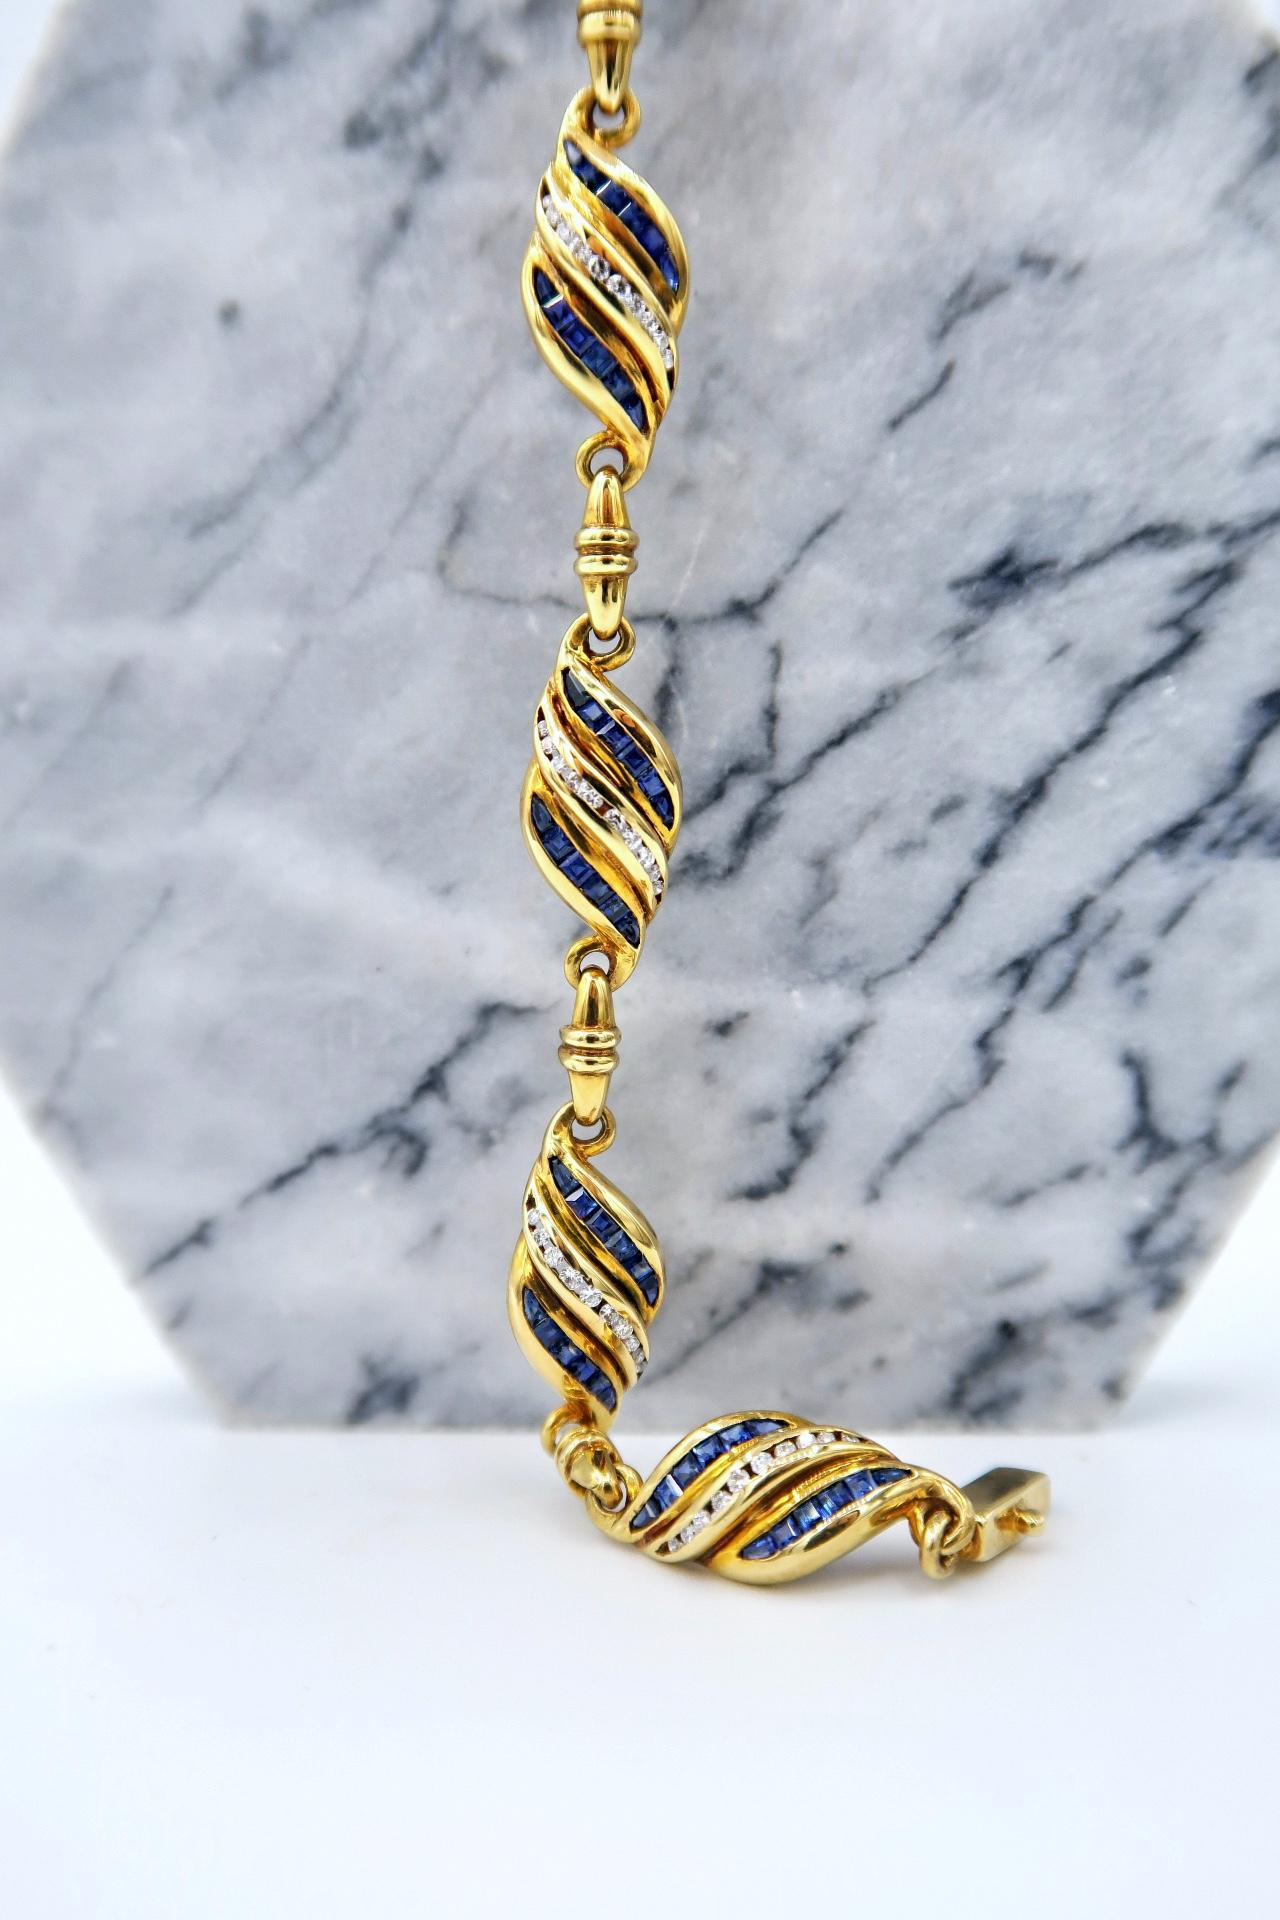 Twisted Triple Striped Baguette Blue Sapphire Diamond Curl Link Bracelet in 18K Yellow Gold

Gold: 18K Yellow Gold, 13.00 g
Blue Sapphire: Baguette, 3.90 ct
Diamond: Round Brilliant, 0.39 ct

Length: 7 inches